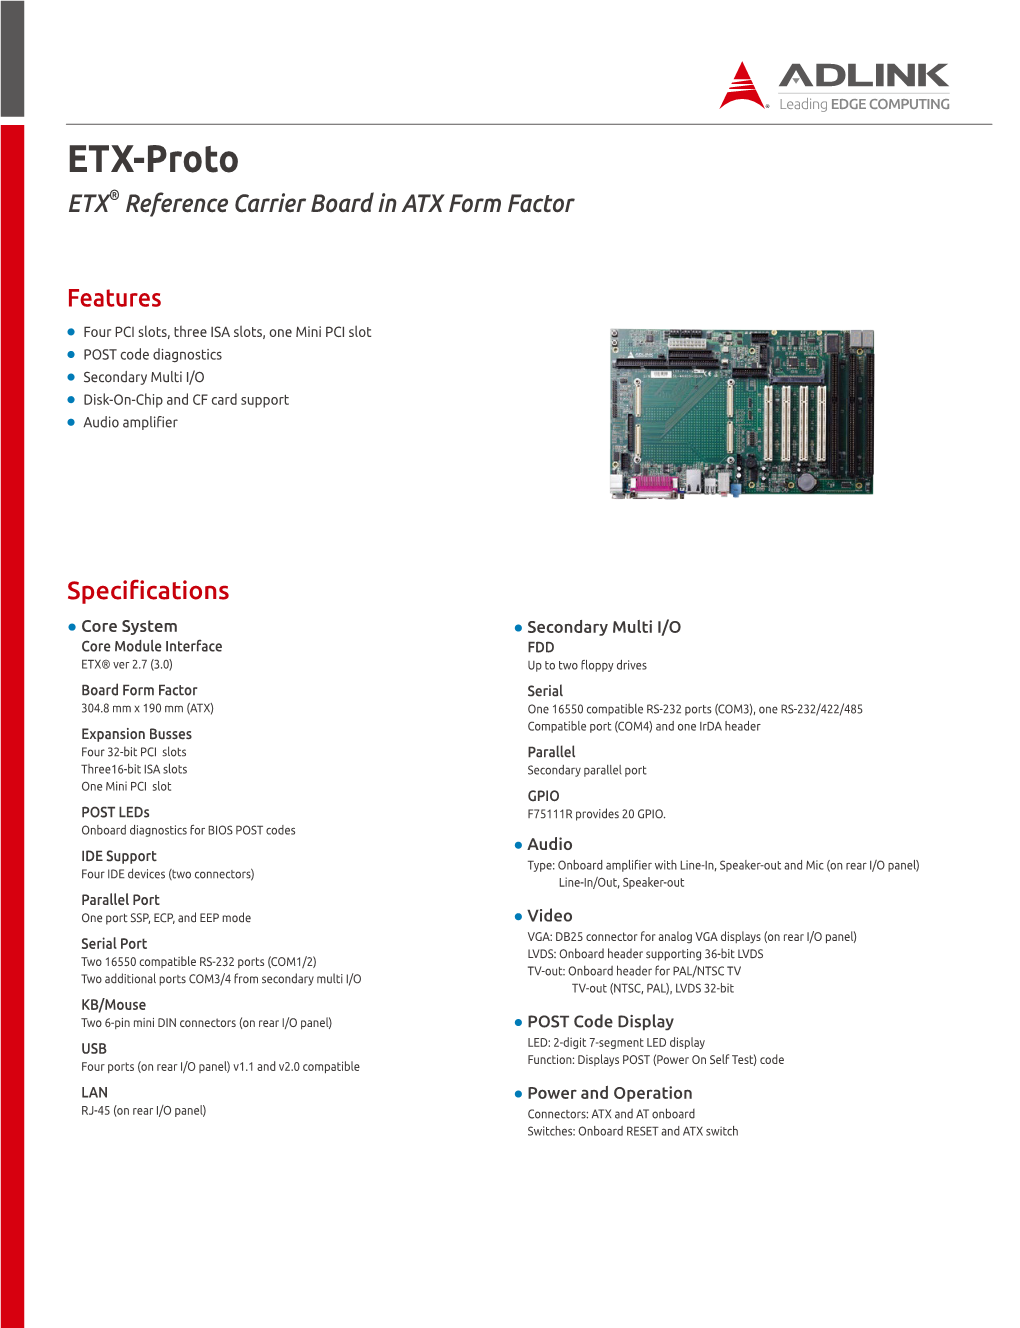 ETX-Proto ETX® Reference Carrier Board in ATX Form Factor